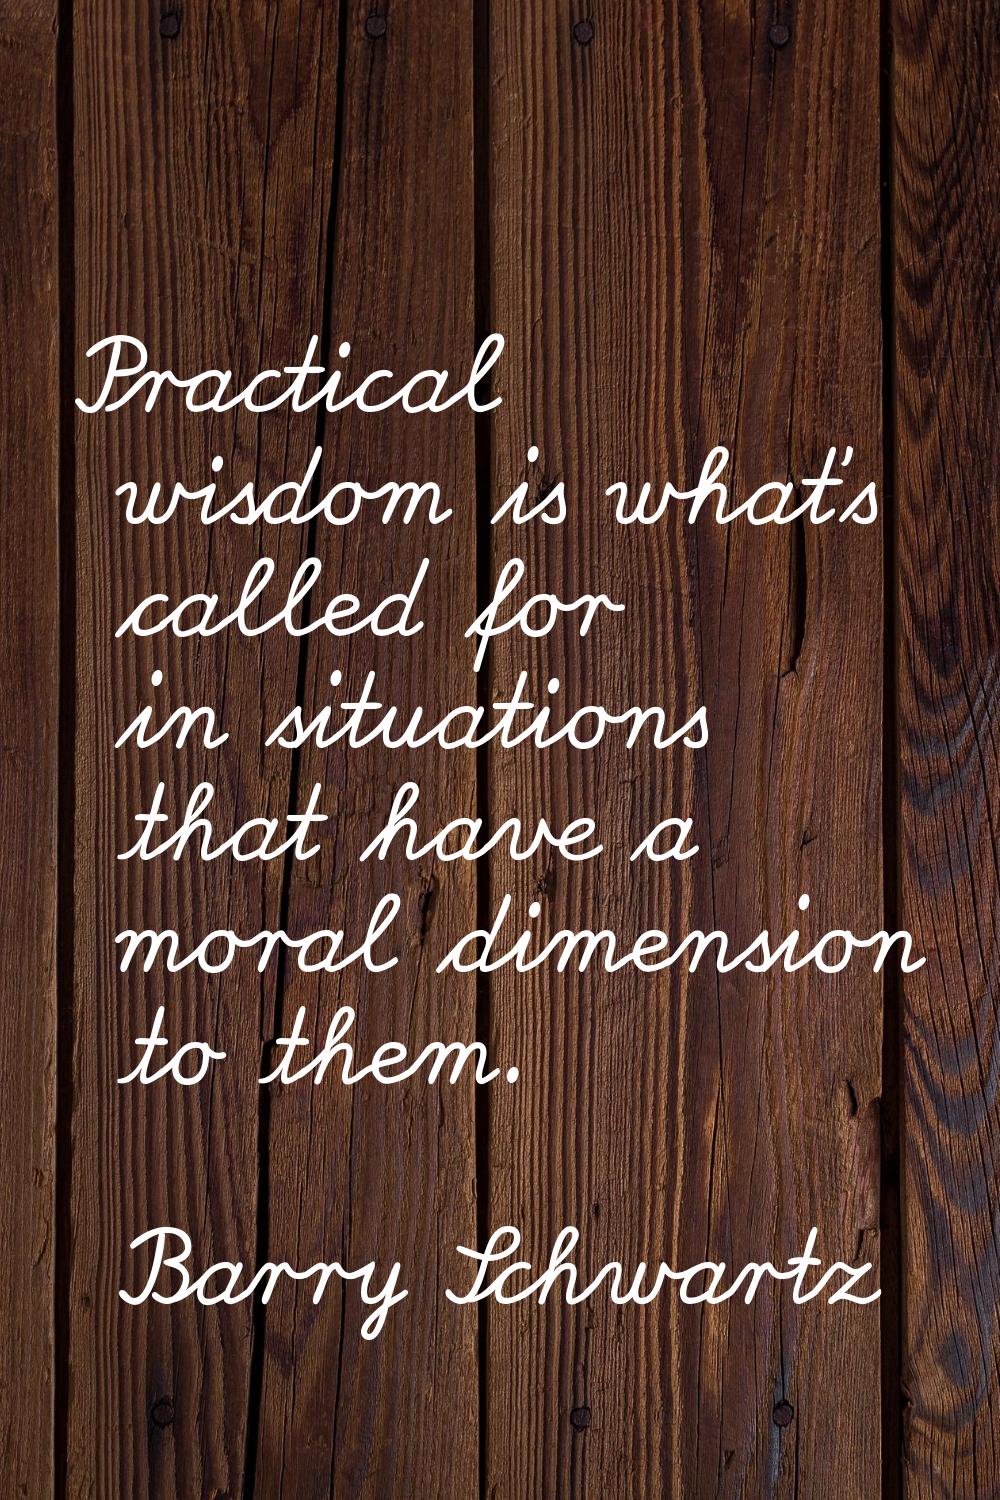 Practical wisdom is what's called for in situations that have a moral dimension to them.